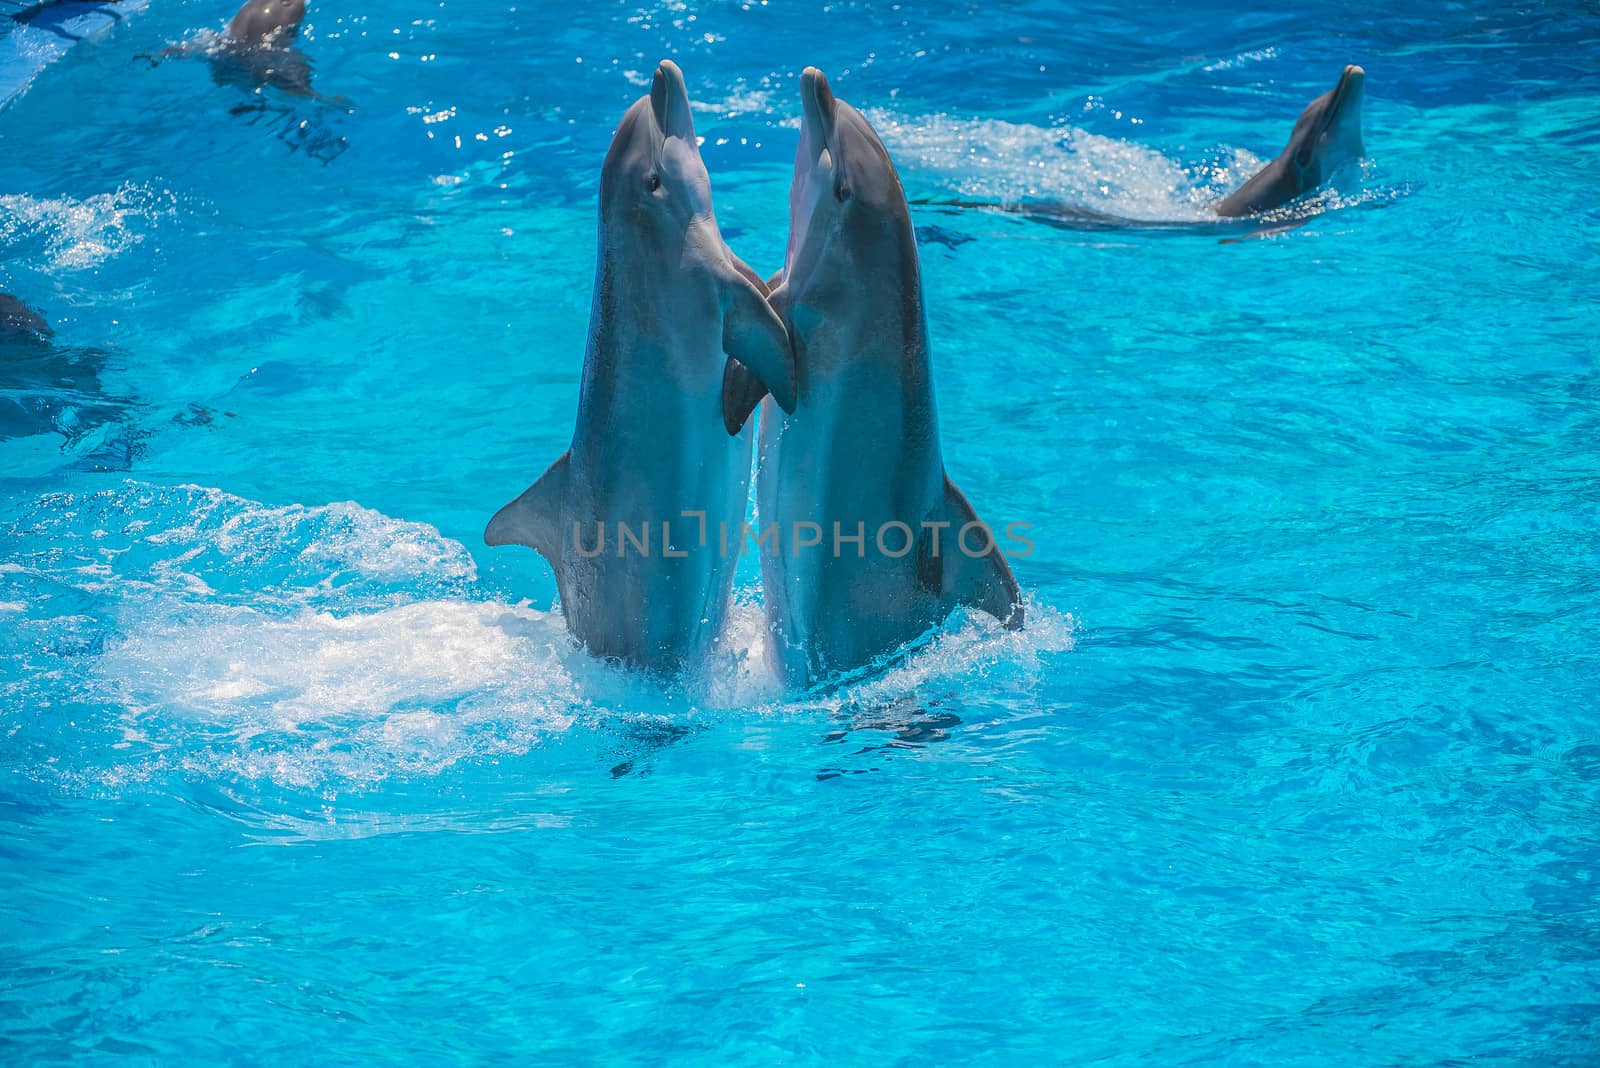 Dolphin pairs has demonstration of tango dancing. All the photos are shot July 25, 2013